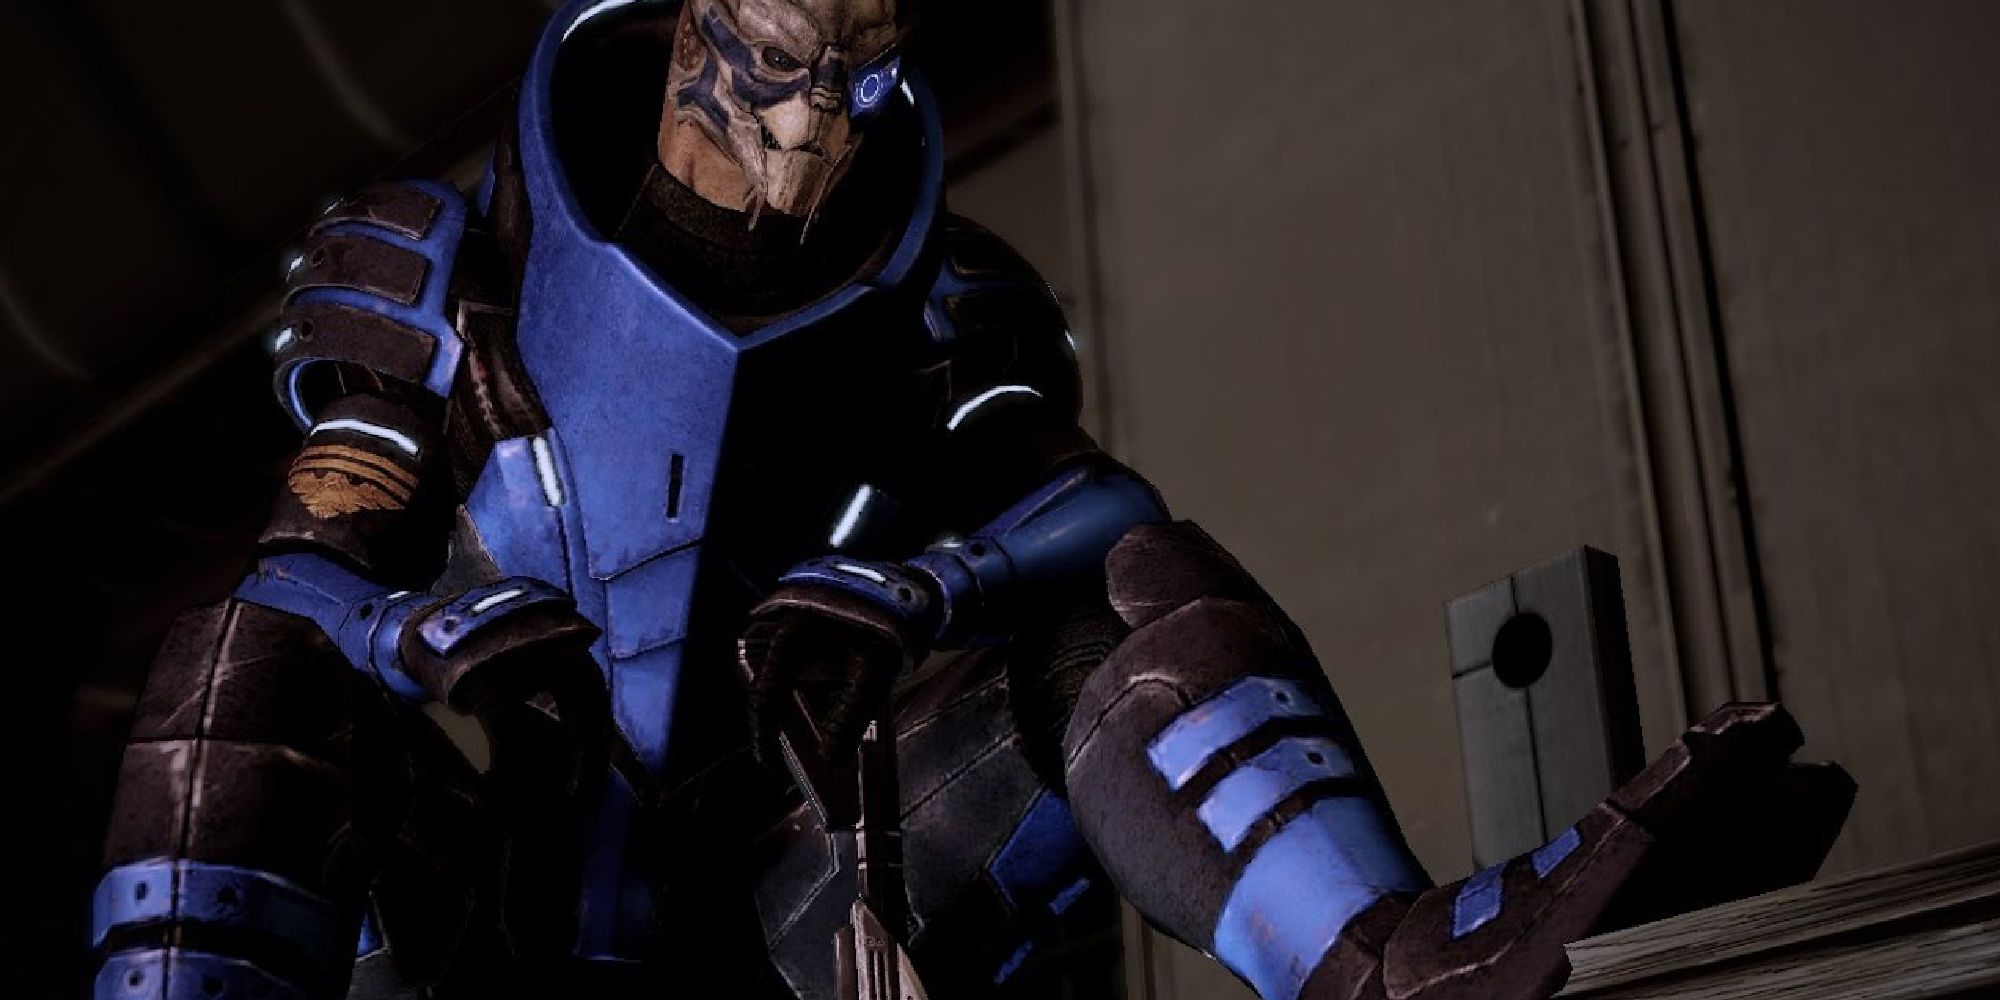 Garrus from Mass Effect 2 sitting with one foot propped up, resting his hand on his trusty sniper rifle